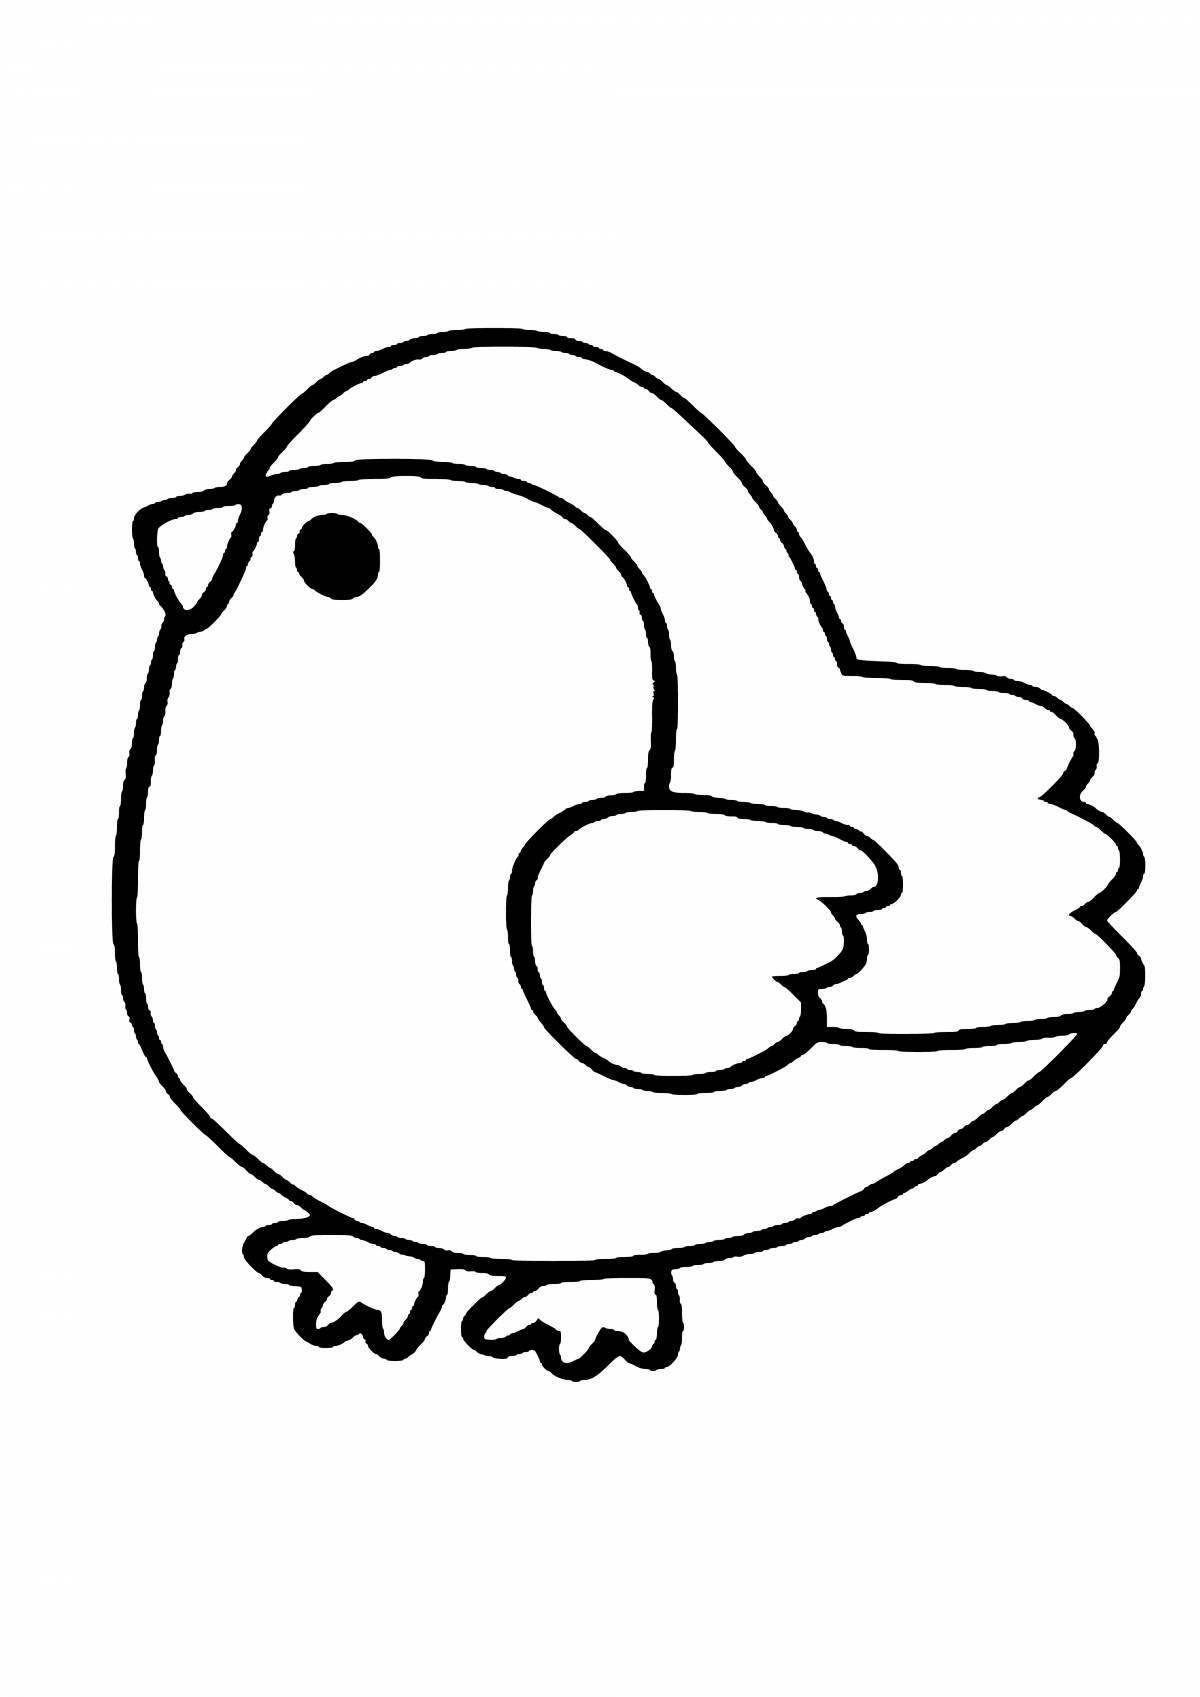 Attractive bullfinch coloring page for kids